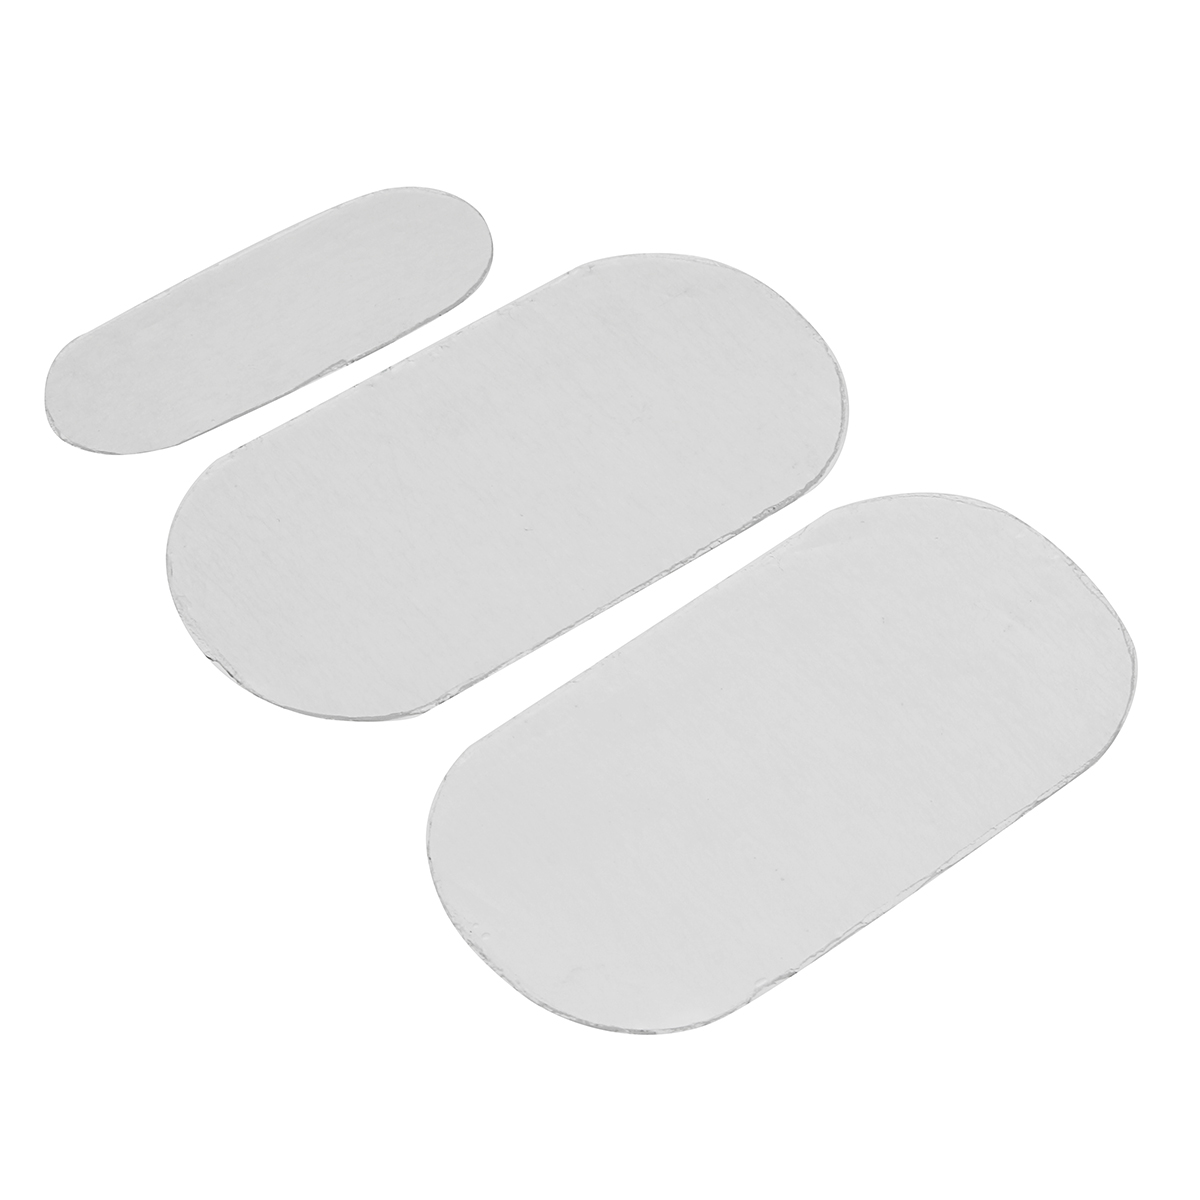 3pcsSet-Replacement-Gel-Sheet-Pad-For-Hip-Trainer-Health-Stick-Muscle-Fit-Fitness-1340074